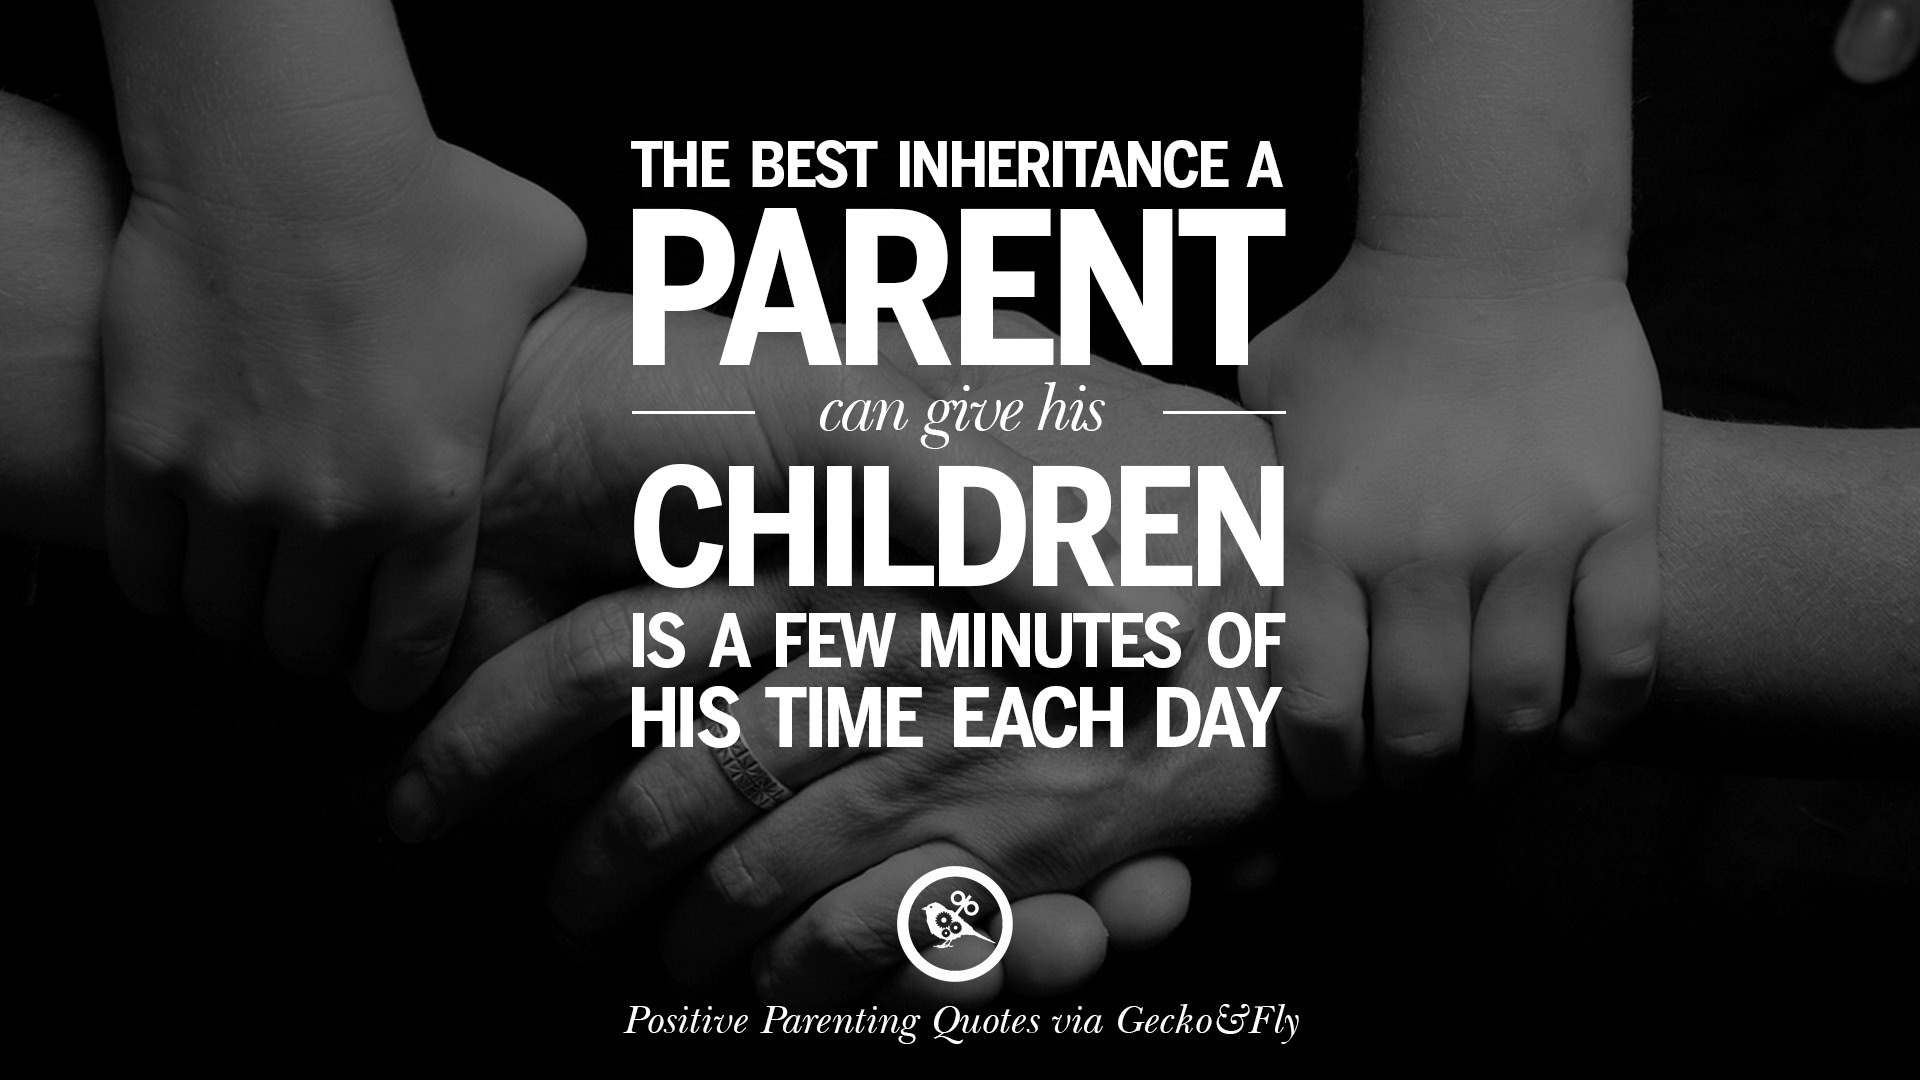 Quotes About Children
 20 Positive Parenting Quotes Raising Children And Be A